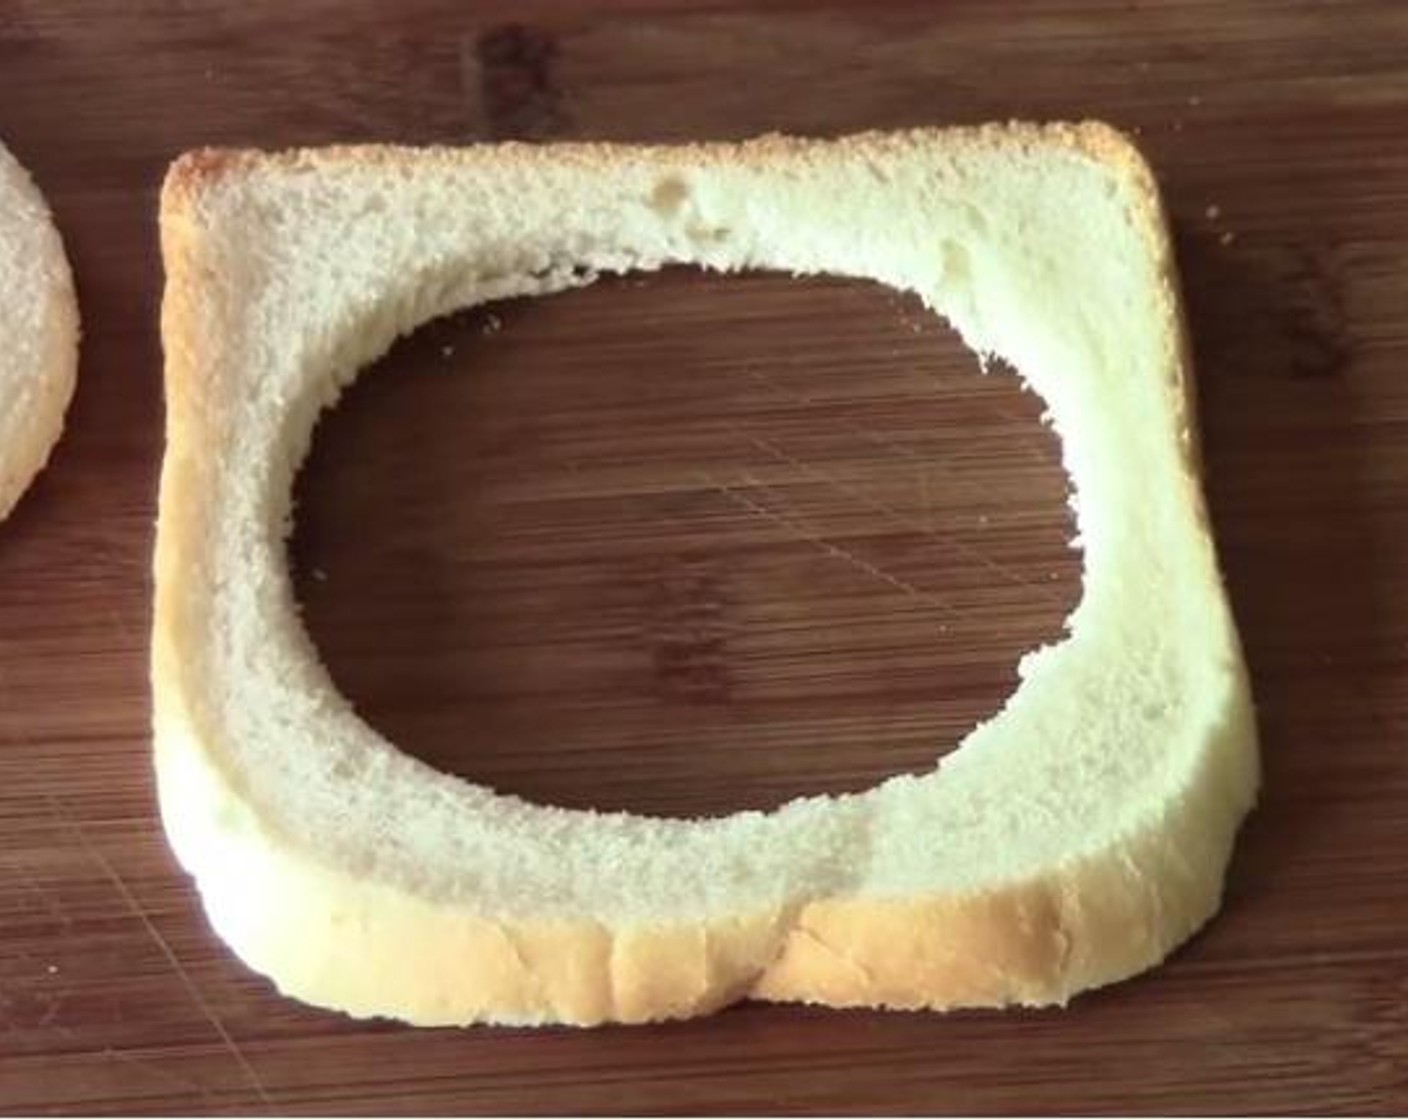 step 1 Using a cookie cutter, cut a hole at the center of the Bread (1 slice). Crack the Egg (1) into a cup.